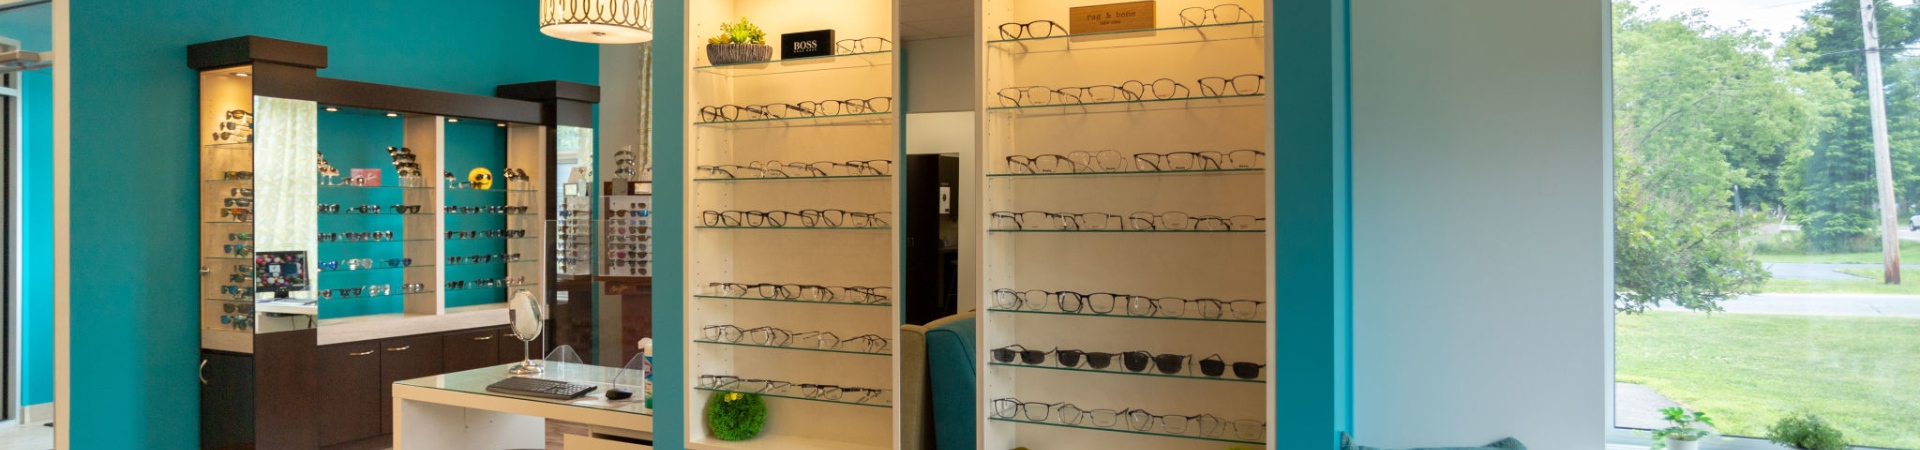 Valley Family Optometry